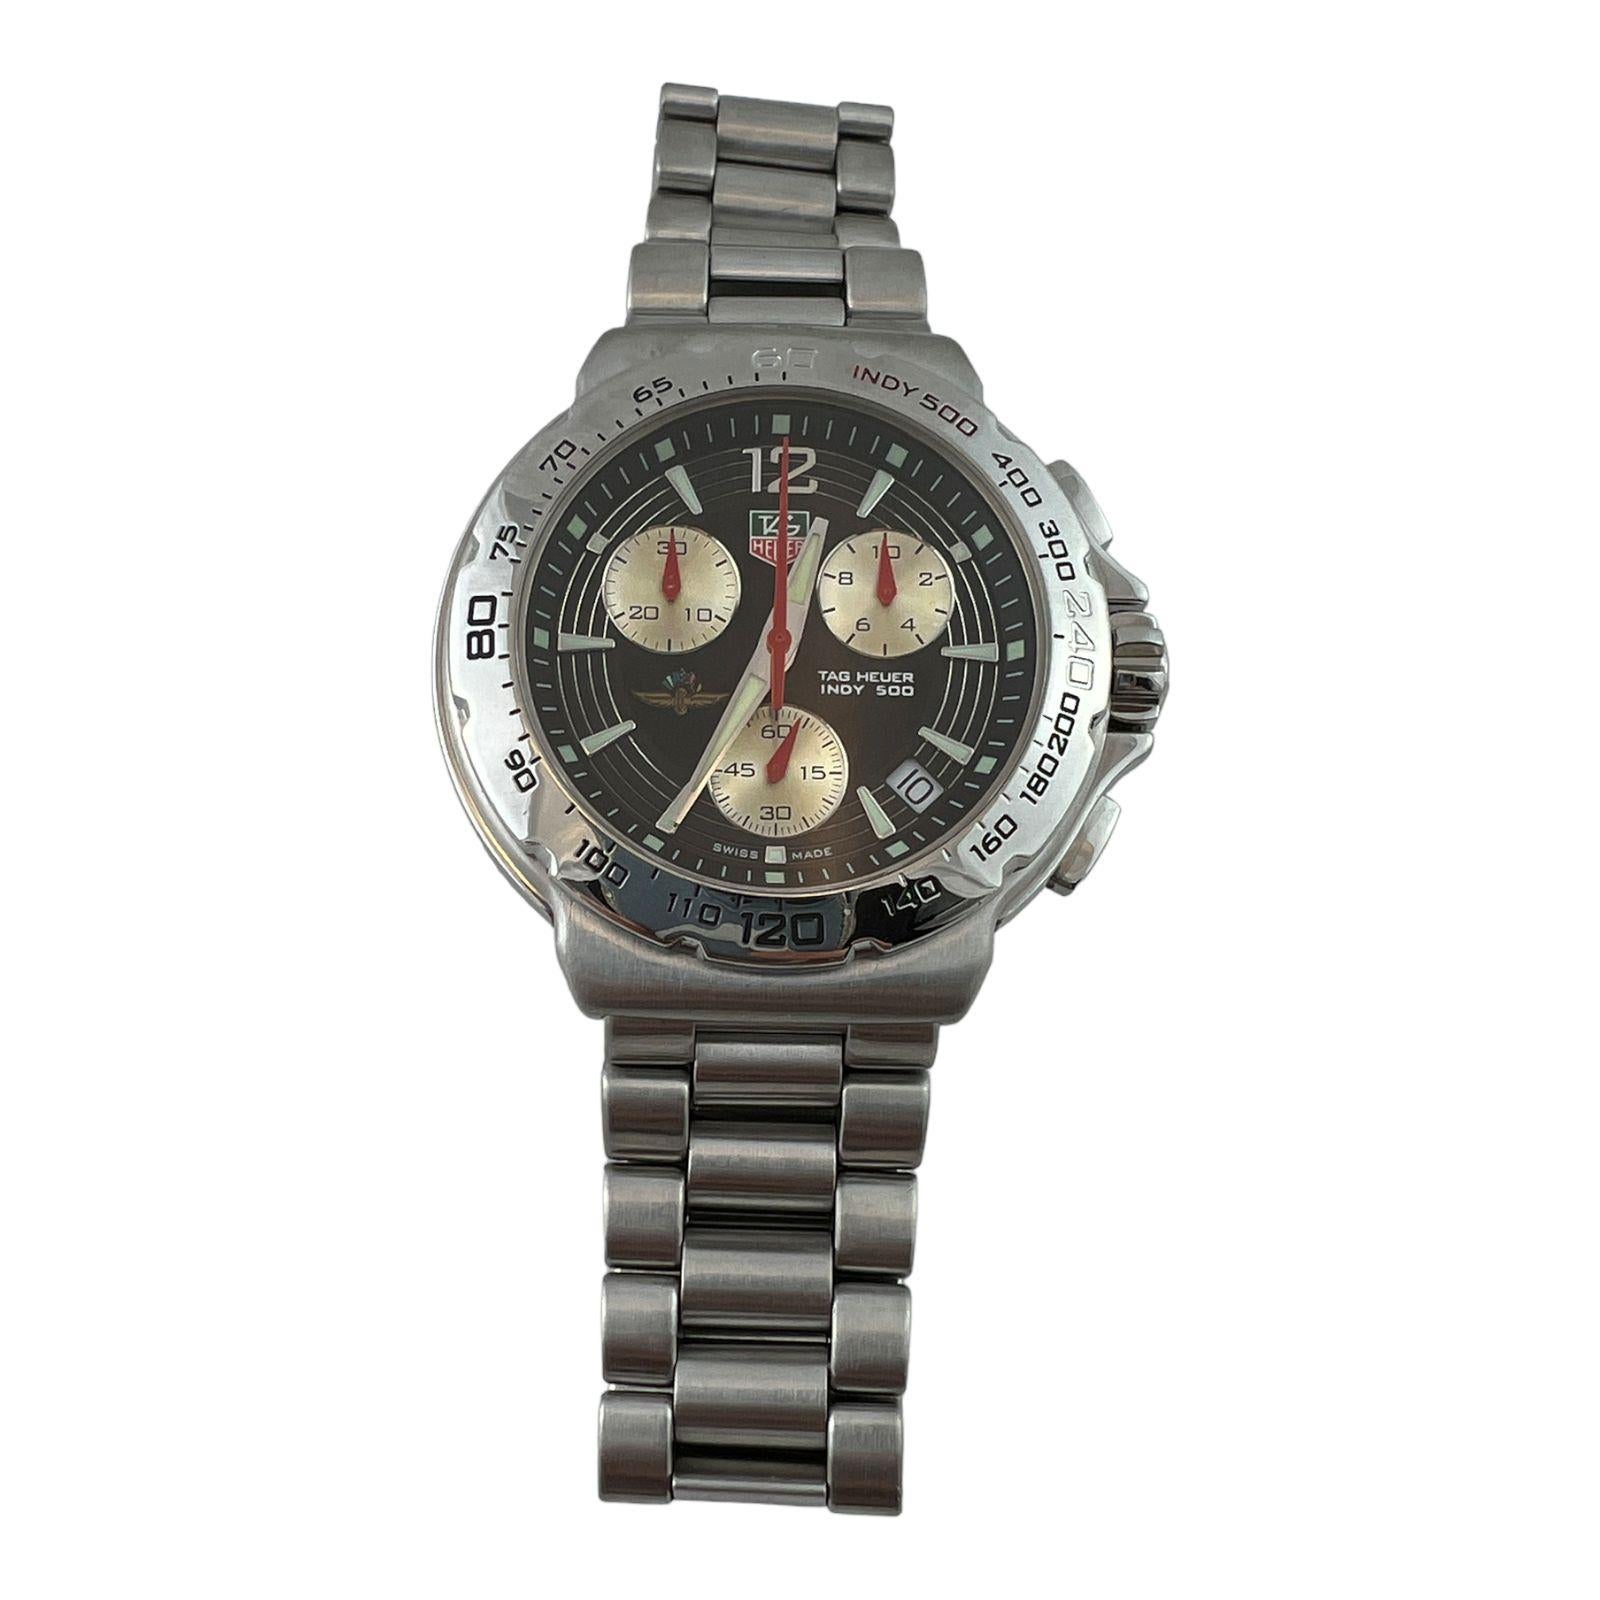 TAG Heuer Indy 500 Formula 1 Watch

Model: CAC111B-0
Serial: NK6094

This classic TAG watch is set in stainless steel

Chronograph with quartz movement.

Black dial 

Stainless steel case is 42mm in diameter

Stainless steel bracelet is in very good